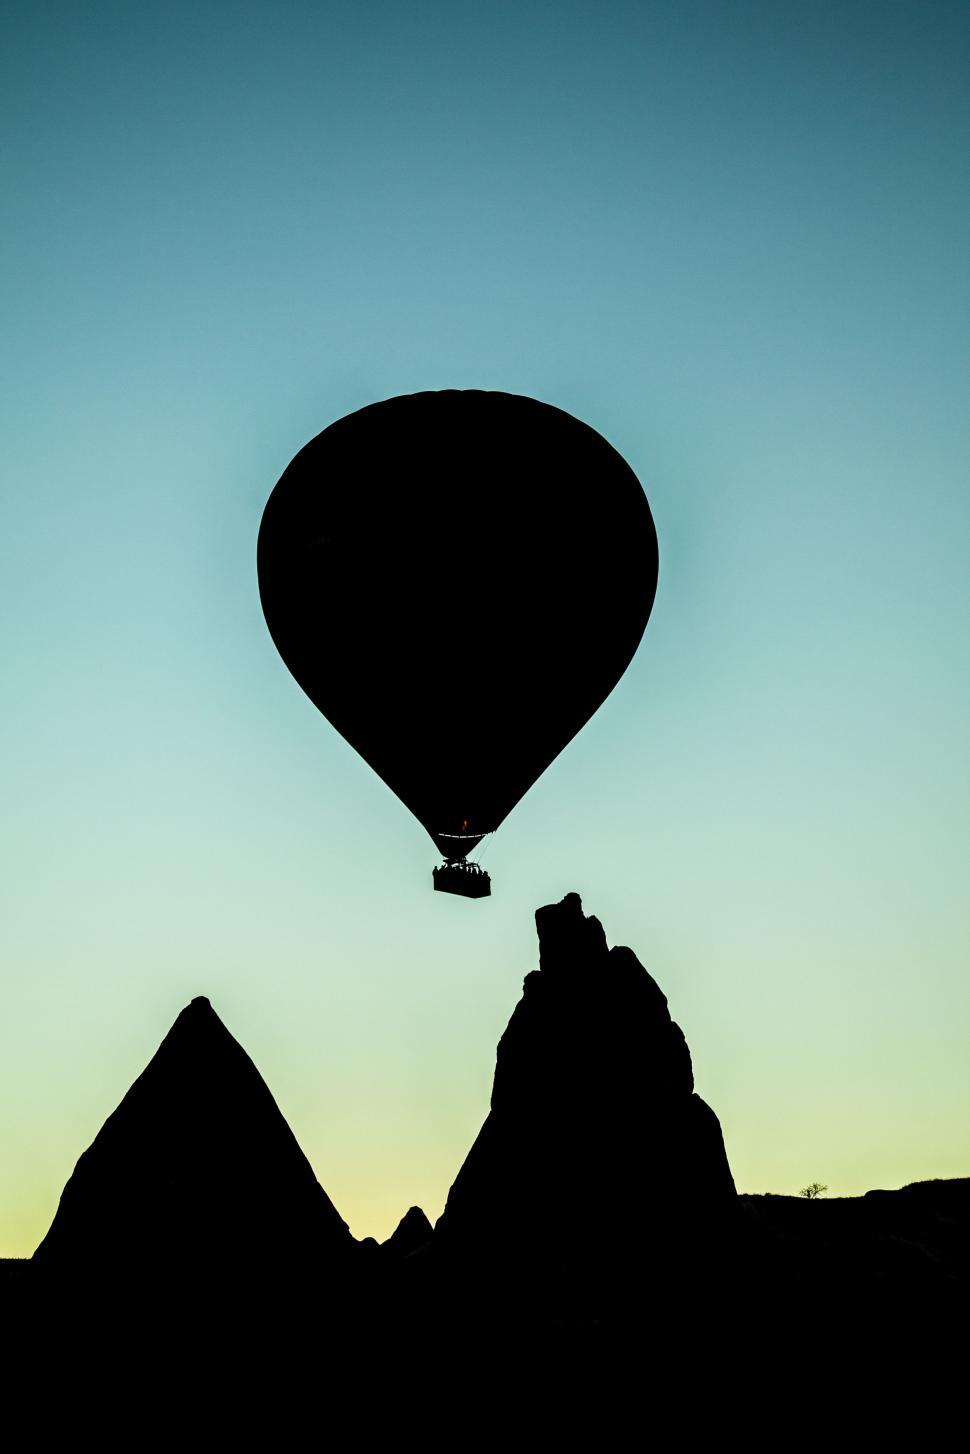 Free Image of Hot Air Balloon Flying Over Mountain Range 